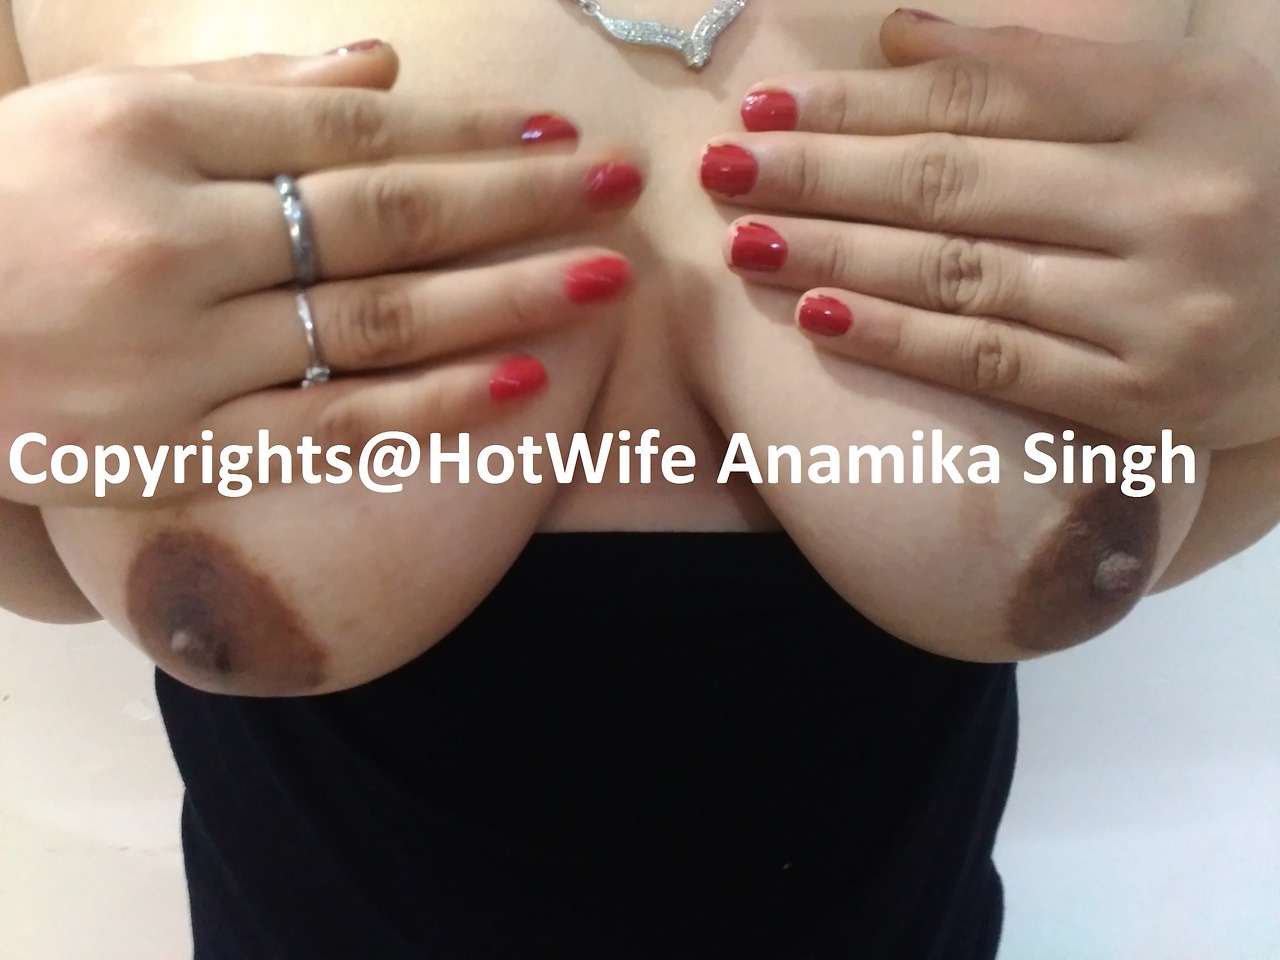 annusingh376:  I am not only his pornstar, Now i am PORNSTAR of all my Fans and My